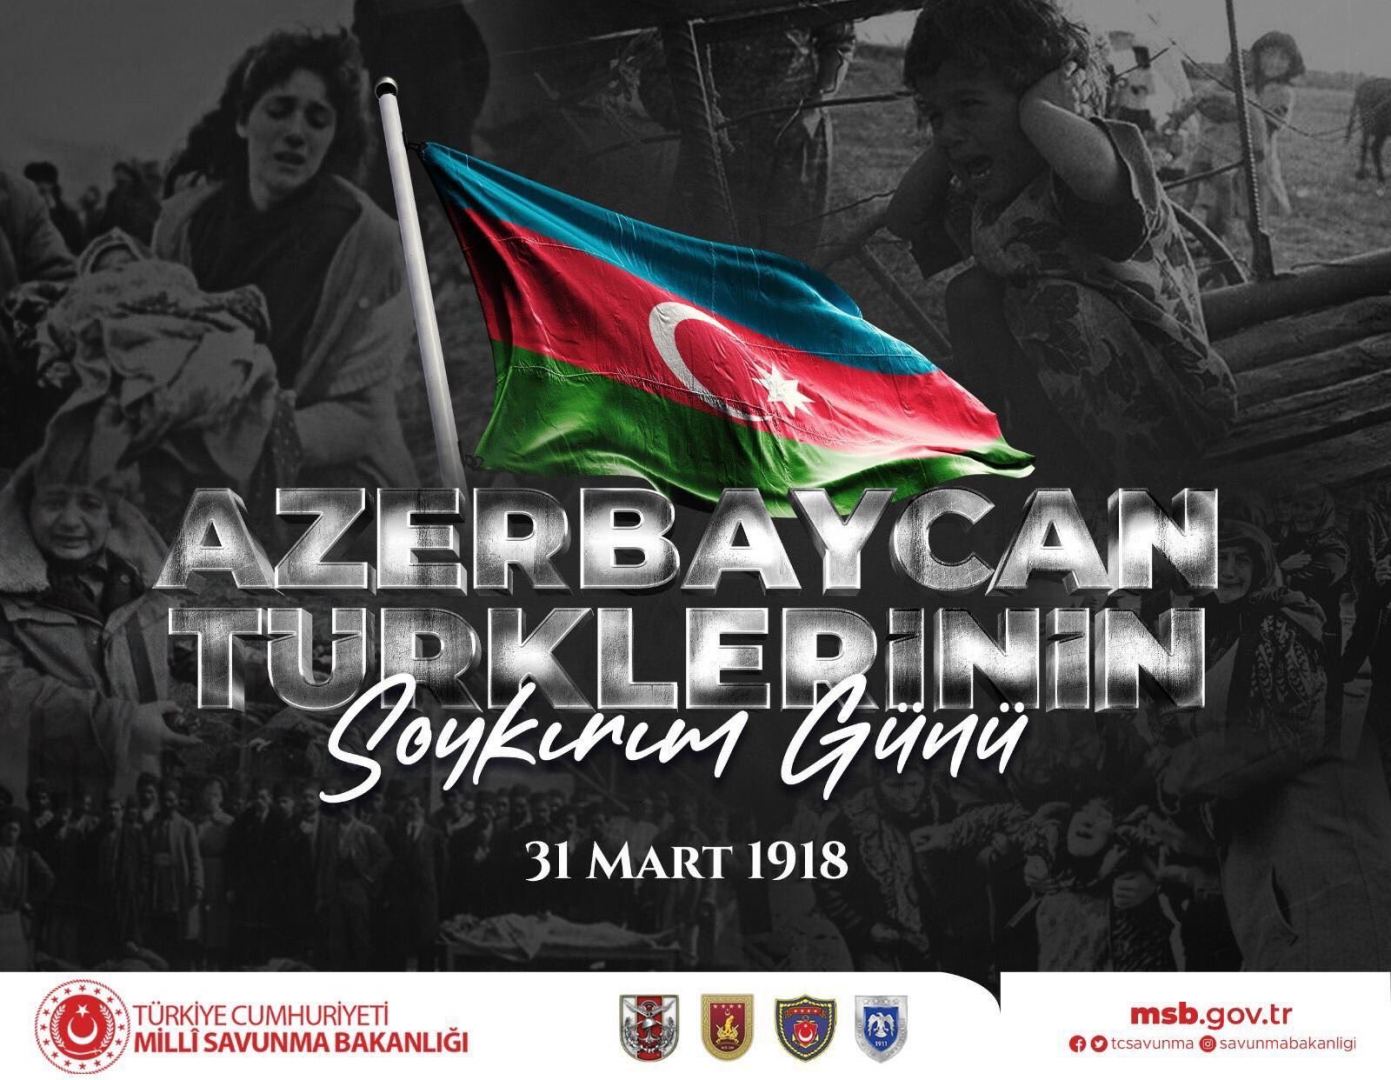 Turkey's Ministry of National Defense makes post on occasion of Day of Genocide of Azerbaijanis